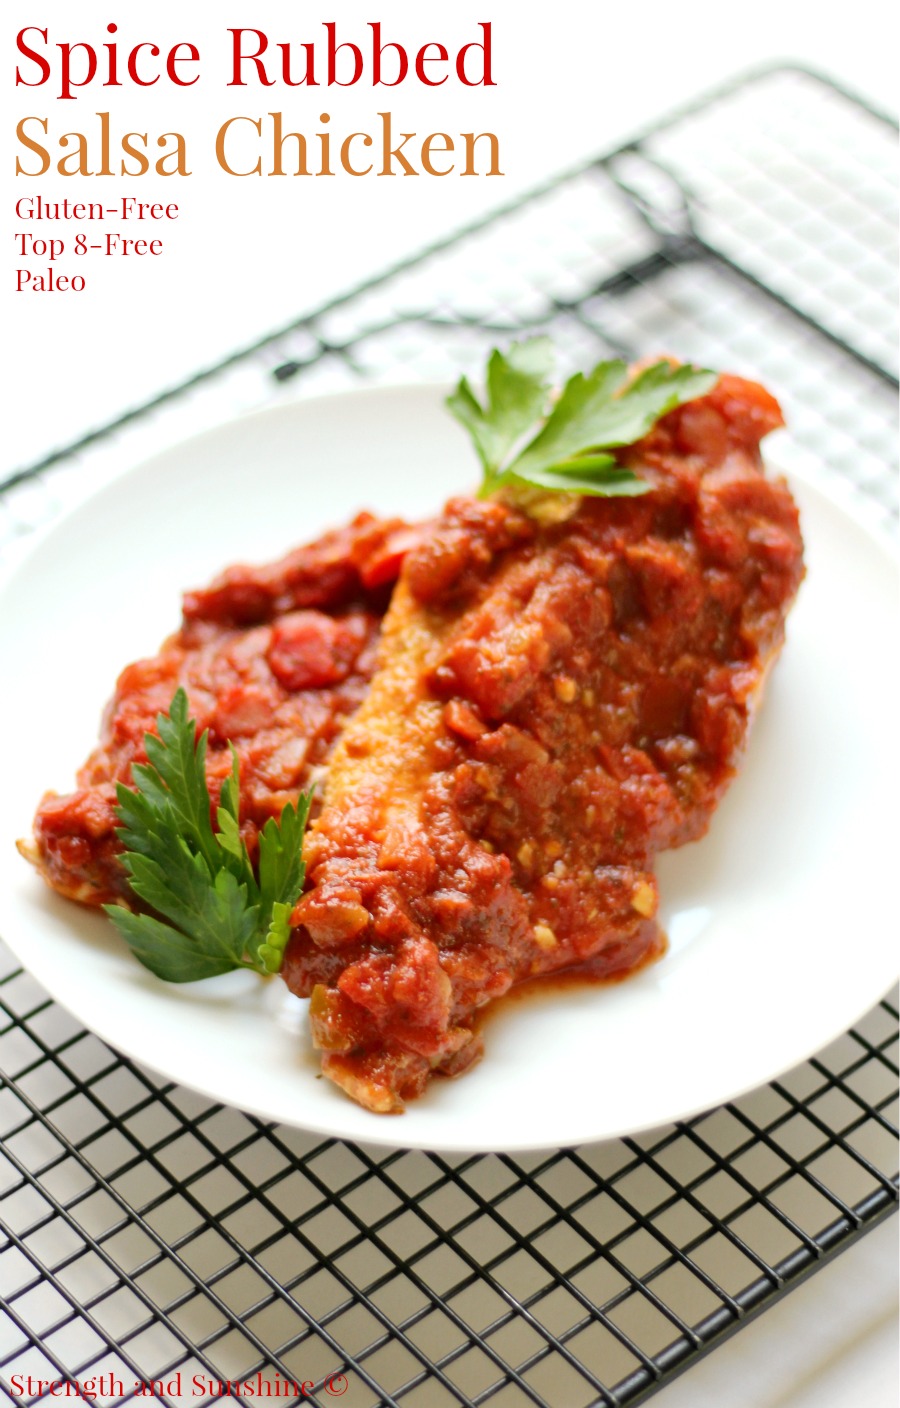 Spice Rubbed Salsa Chicken | Strength and Sunshine @RebeccaGF666 Spice Rubbed Salsa Chicken takes the typical chicken and salsa pairing up a few notches in an easy, gluten-free, allergy-free, and paleo way! A great dinner recipe to have on hand so you can whip up something tasty and healthy for the whole family on any weeknight!